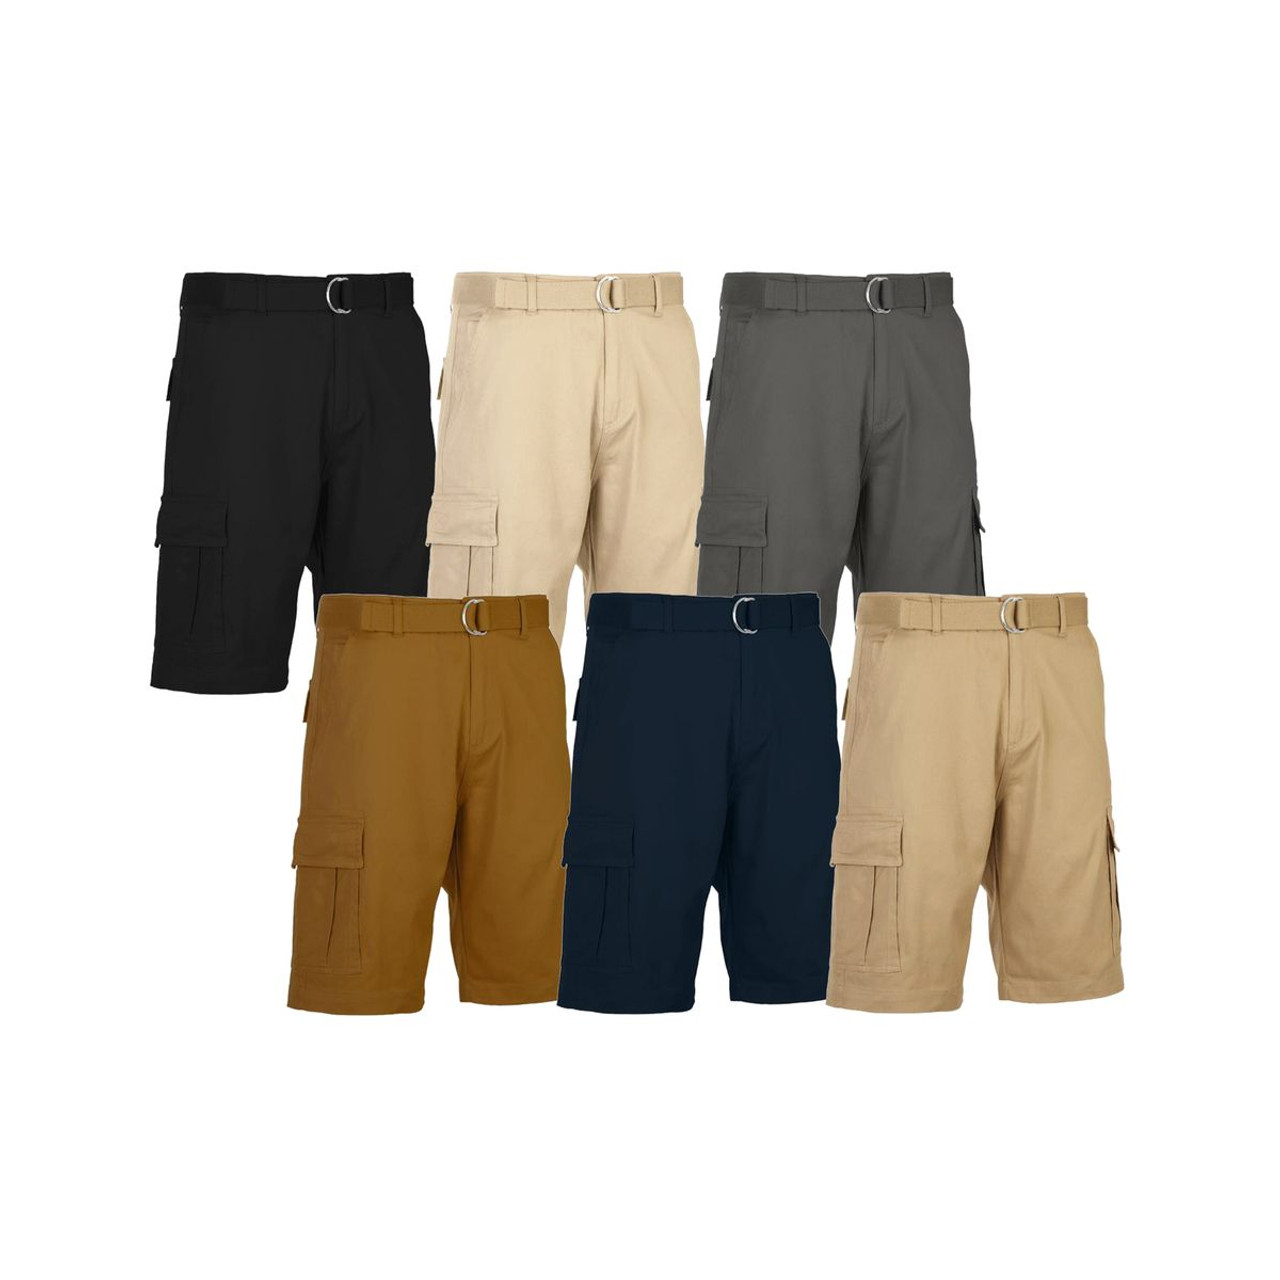 Men's Cotton Flex Stretch Cargo Shorts with Belt (3-Pack) product image